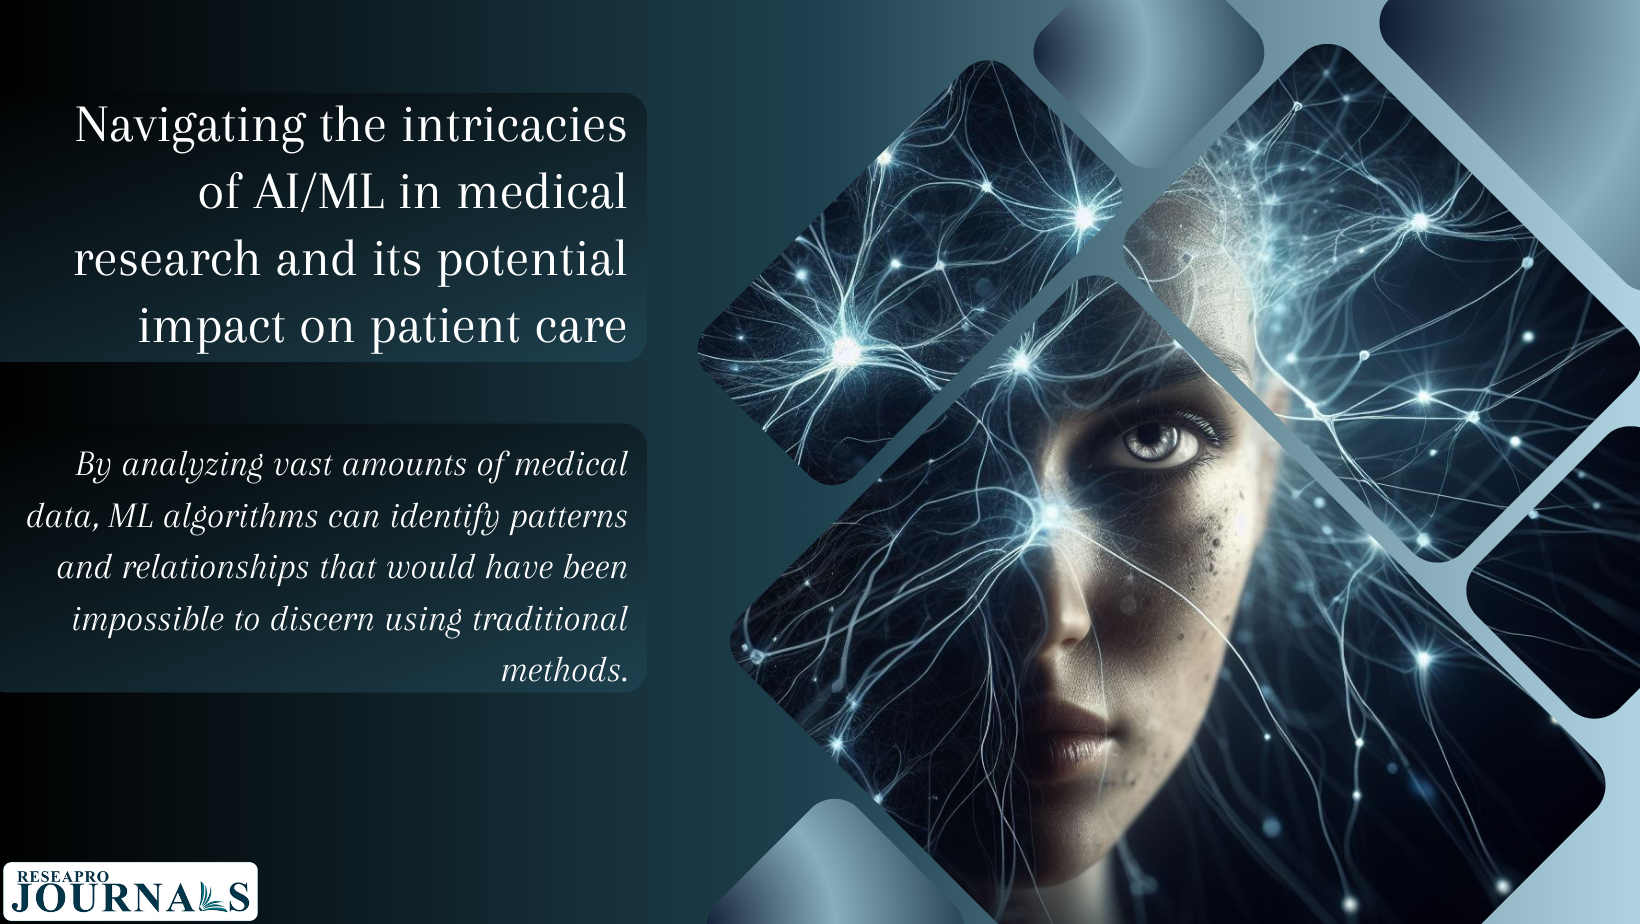 Navigating the intricacies of AI/ML in medical research and its potential impact on patient care